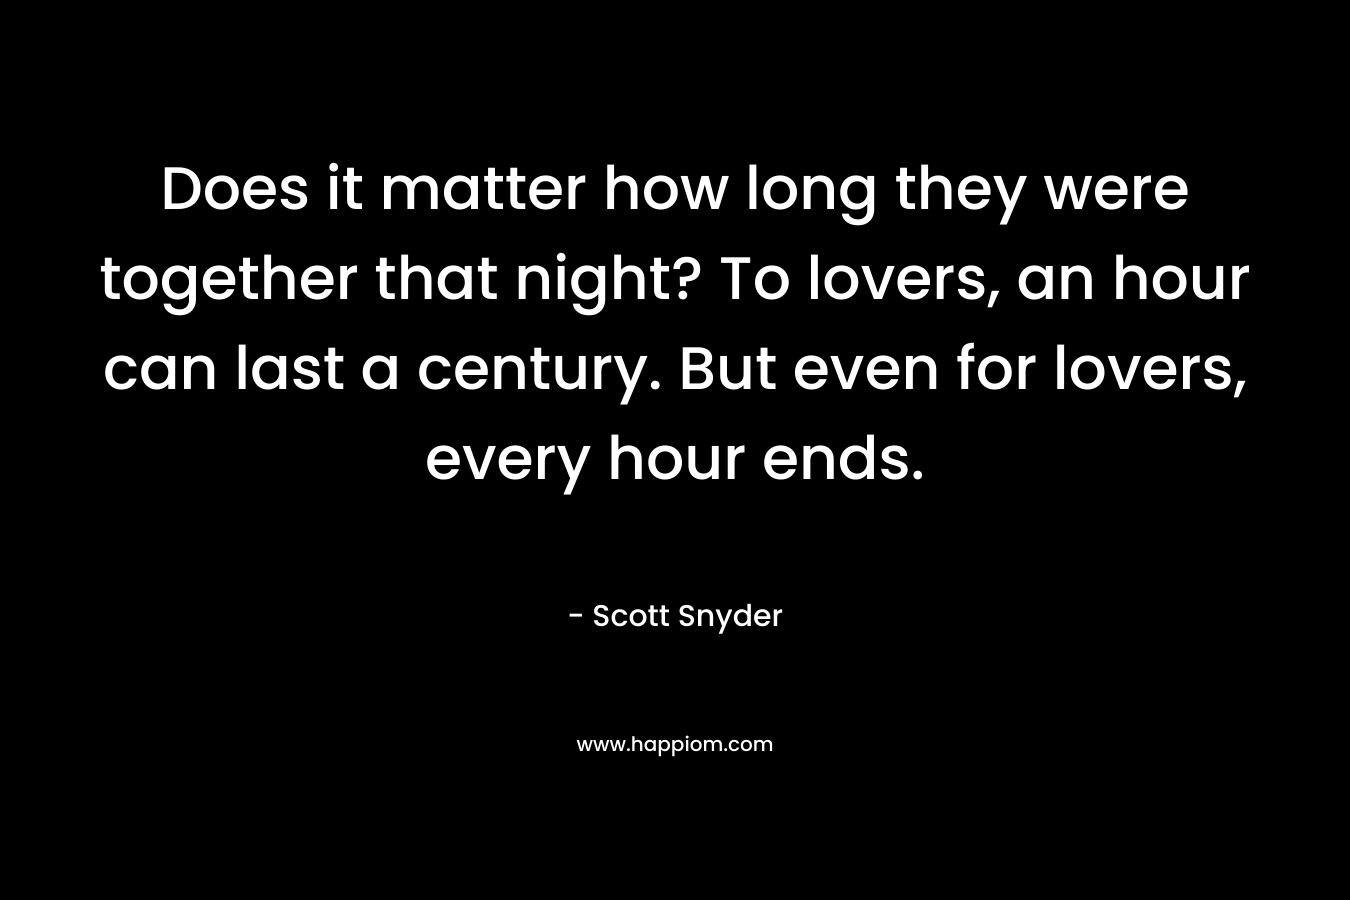 Does it matter how long they were together that night? To lovers, an hour can last a century. But even for lovers, every hour ends.